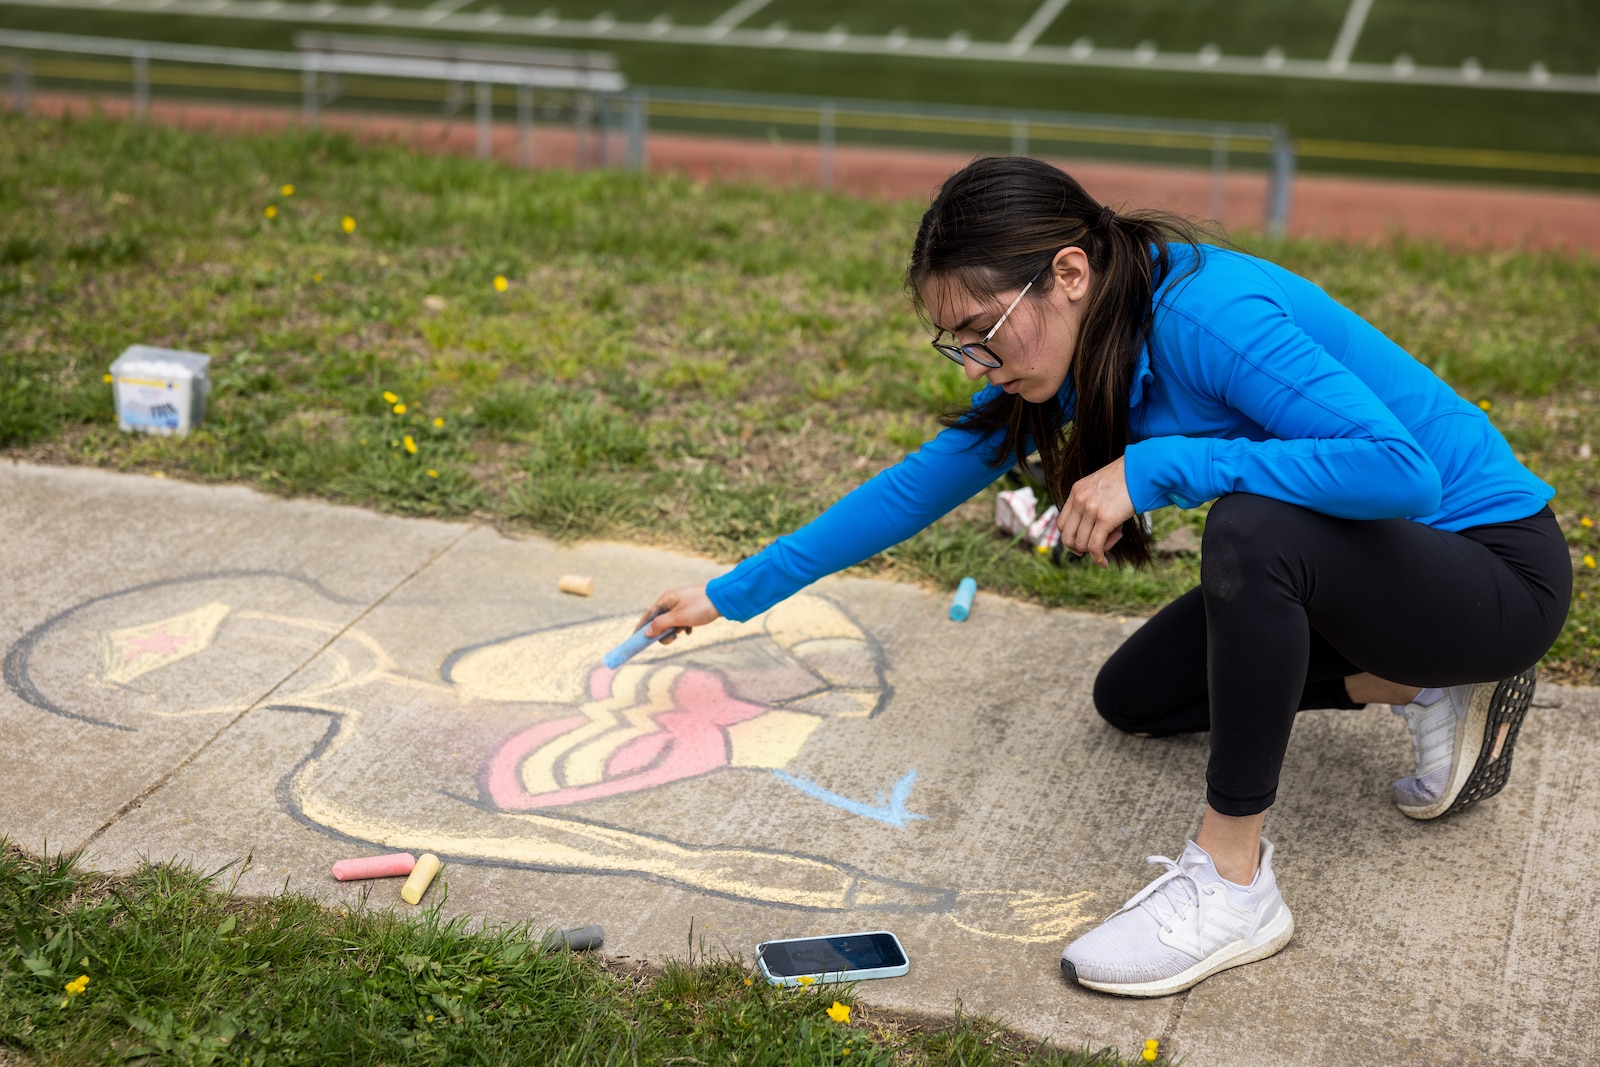 U.S. Marine Corps Sgt. Emily Sevillano Meza, a data systems administrator with Marine Corps Cyberspace Operations Group, an Arizona native, participates in a Chalk the Walk session during the Spin Against Sexual Assault event at Butler Stadium on Marine Corps Base Quantico, Virginia, April 12, 2024. This event provides an opportunity for MCBQ military and civilian personnel to collaborate in different group activities such as spin classes, group art, chalk the walk, and training from the Office of the Special Trial Counsel. (U.S. Marine Corps photo by Lance Cpl. Ethan Miller)